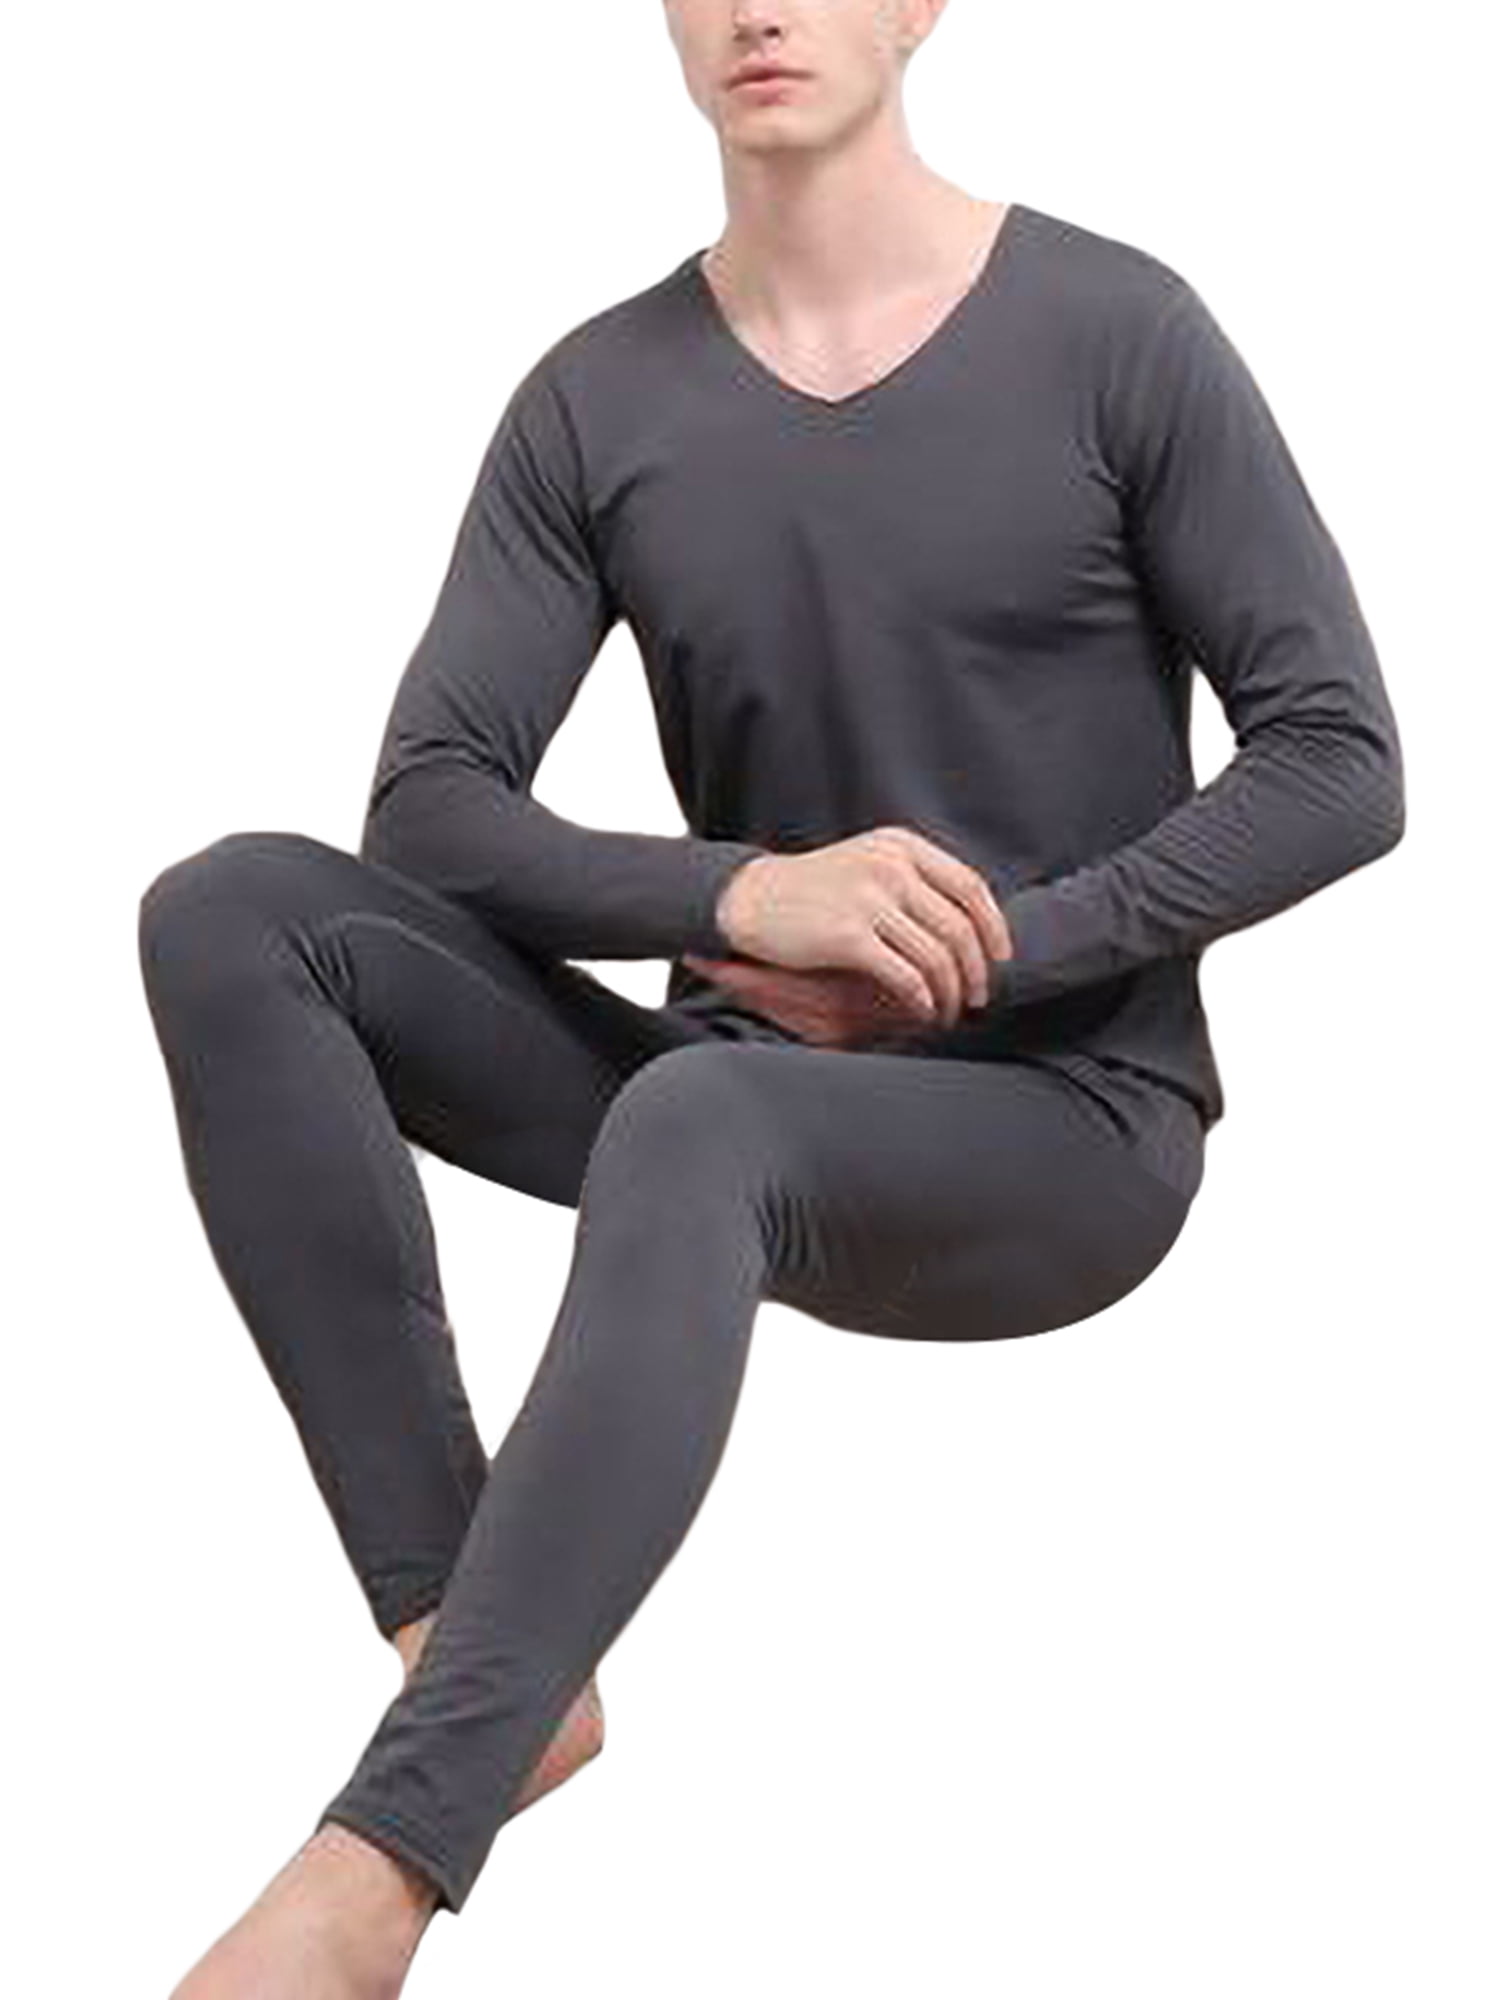 ROCKY Thermal Underwear for Men Fleece Lined Thermals Mens Base Layer Long John Set Navy